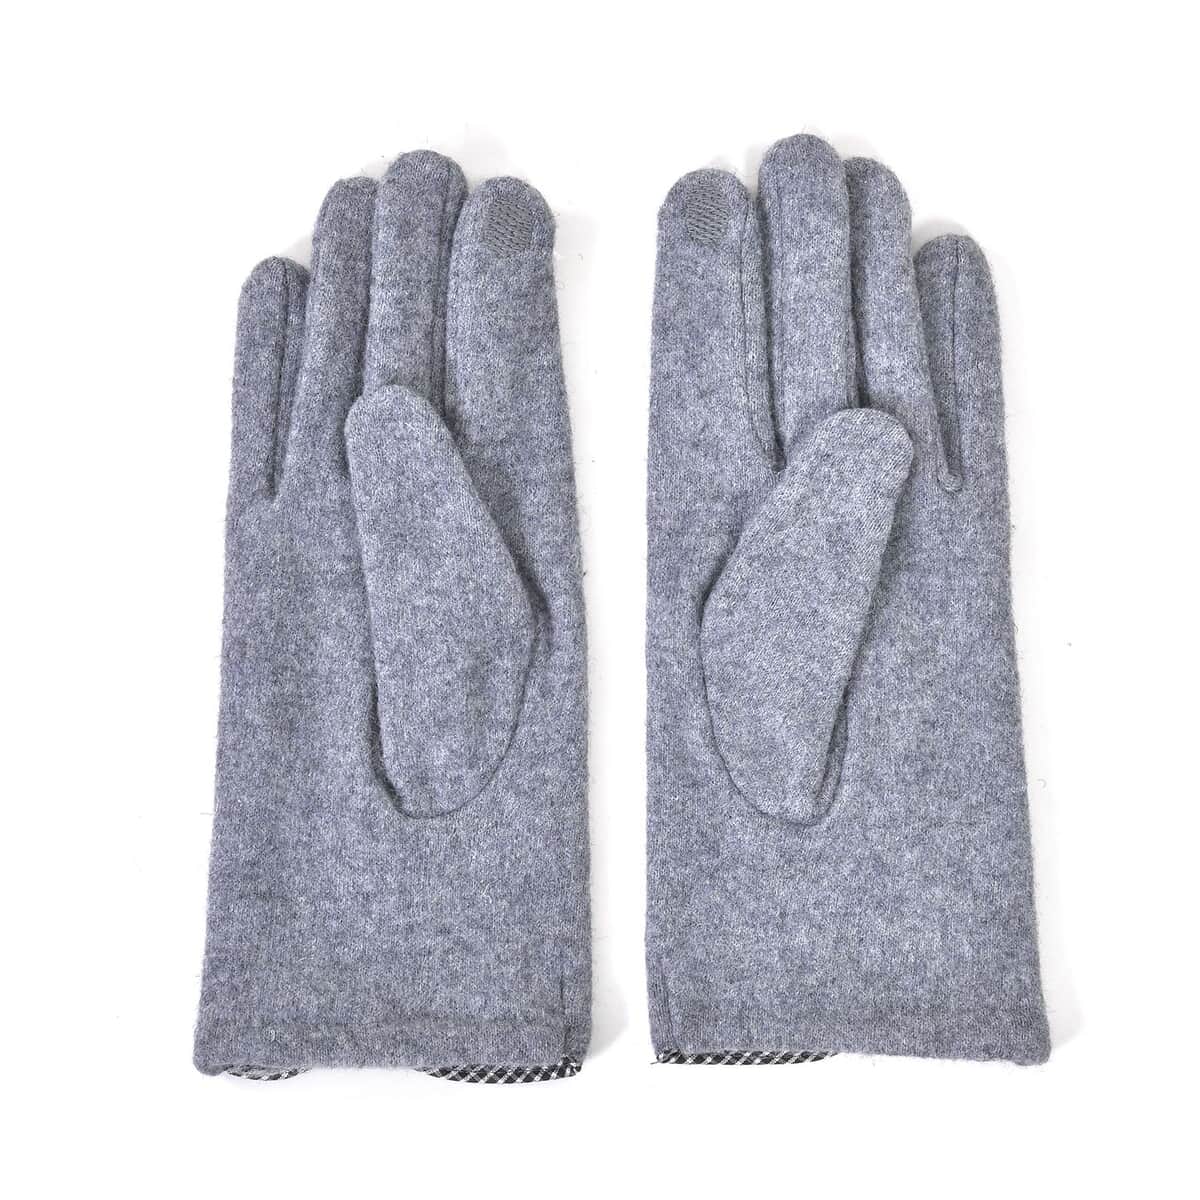 Gray 70% Cashmere Wool and 30% Polyster Gloves with Touch Screen Function (9"x3.93") image number 3